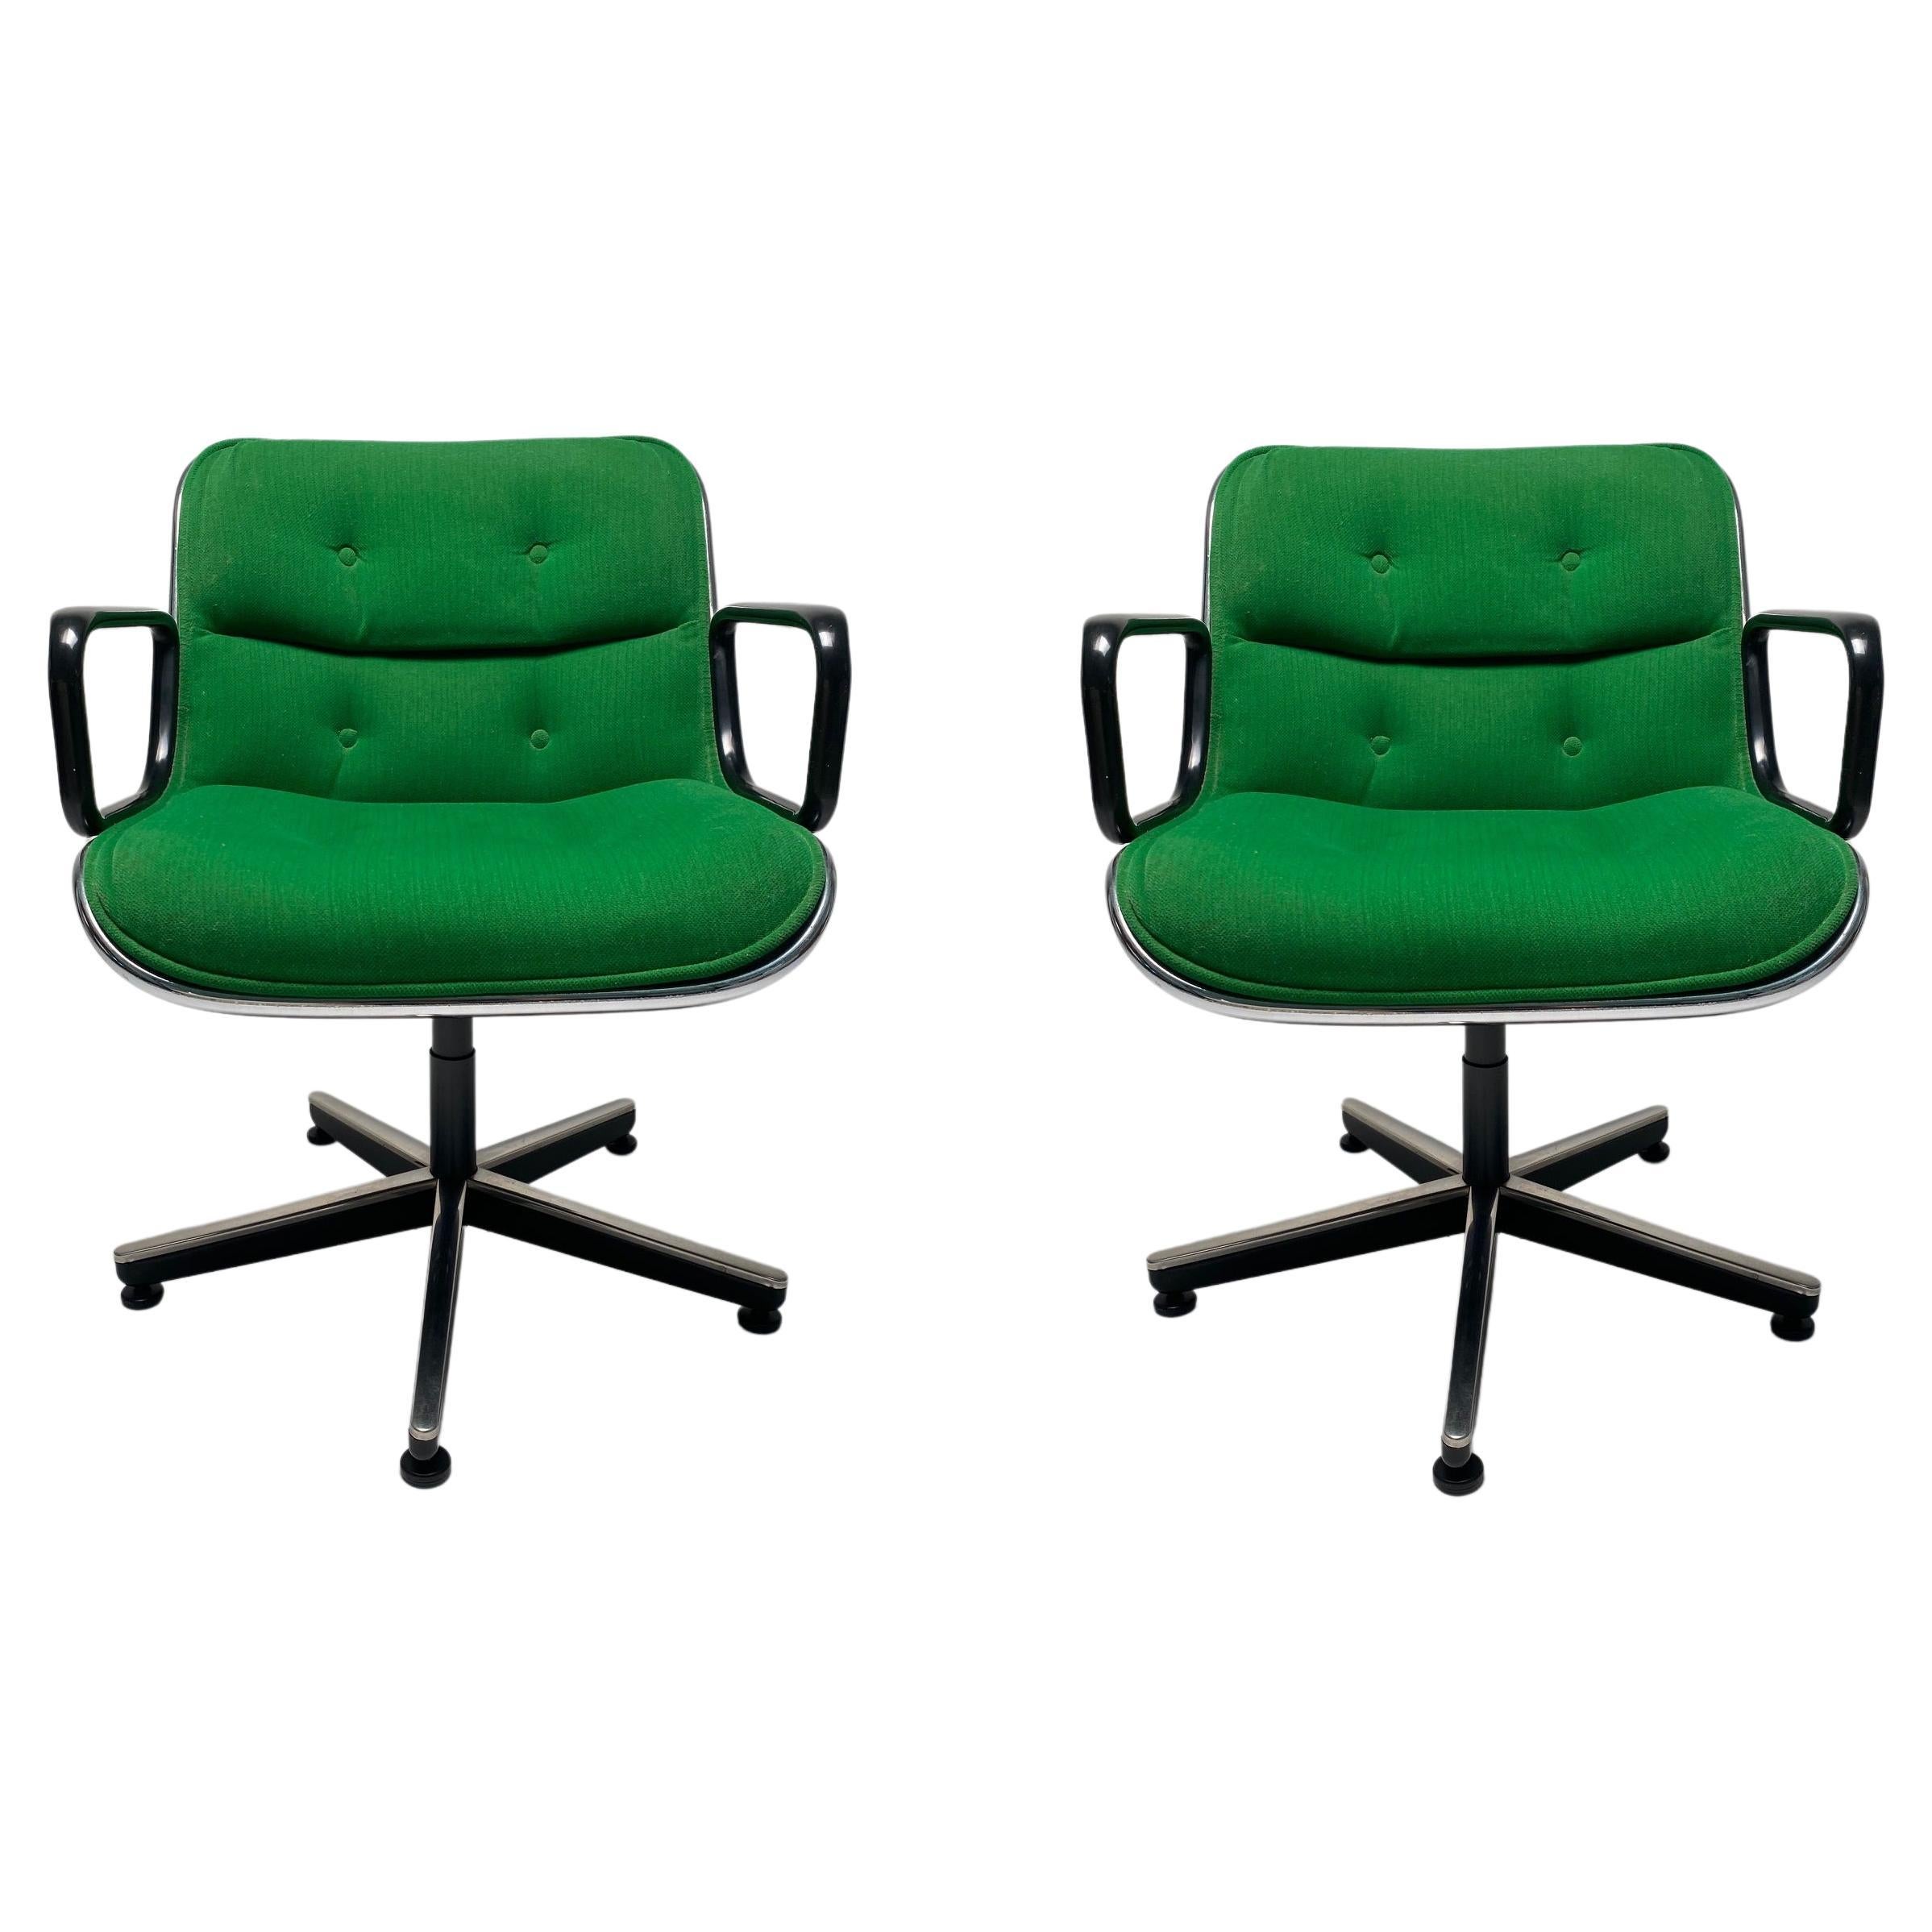 Executive office chair by Charles Pollock, Knoll, 1960s